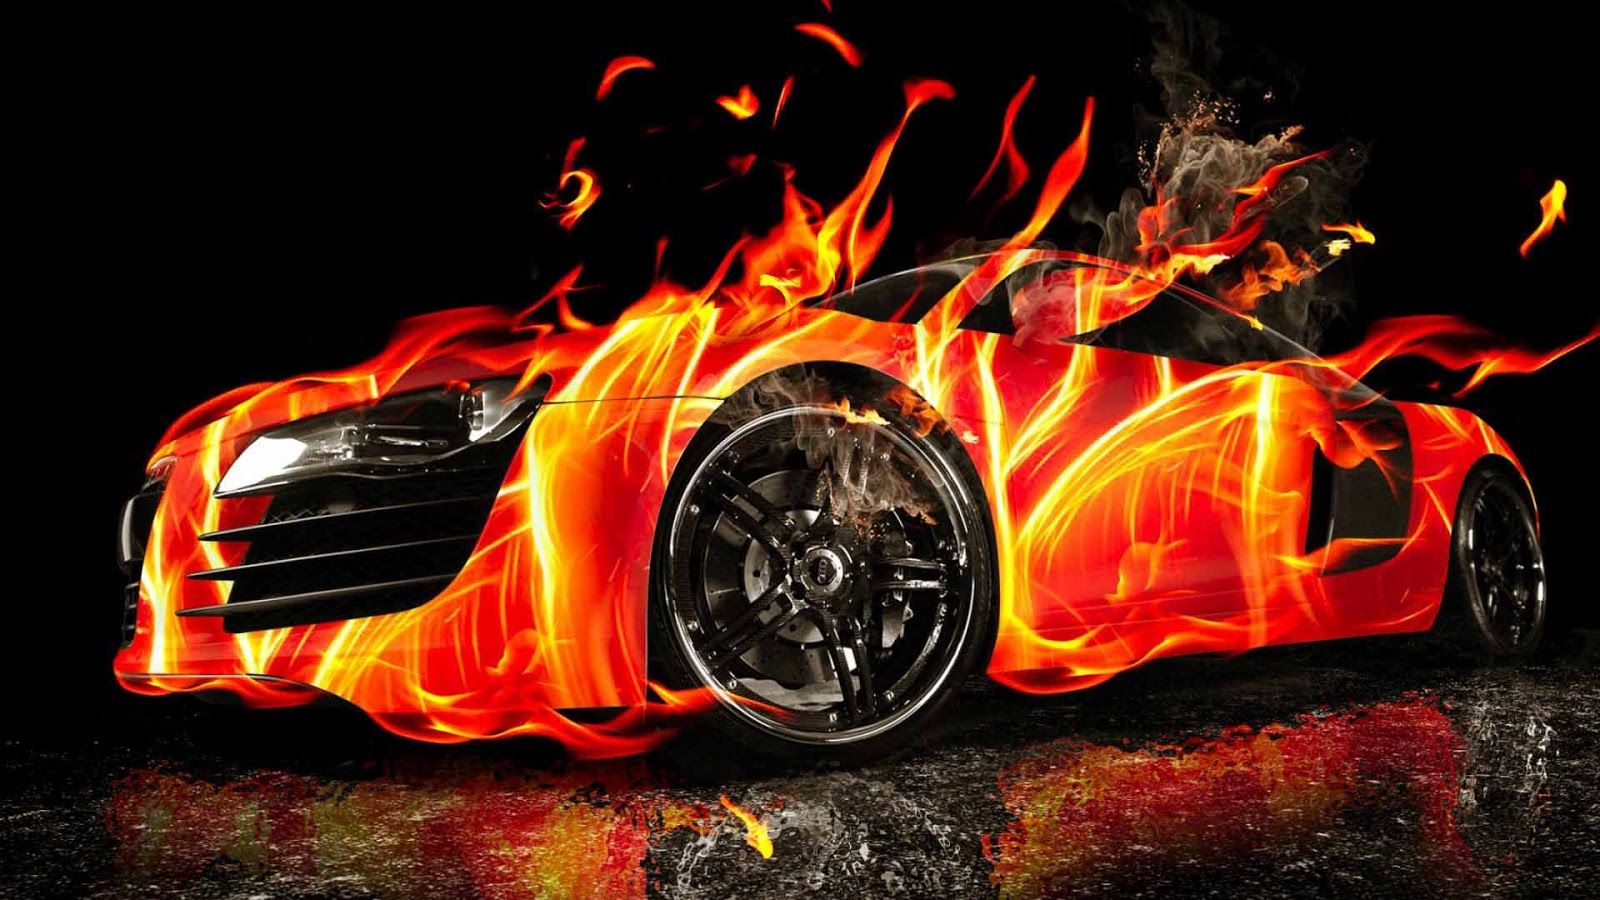 Cool Fire Background. Cool wallpaper cars, Sports car wallpaper, Cool cars